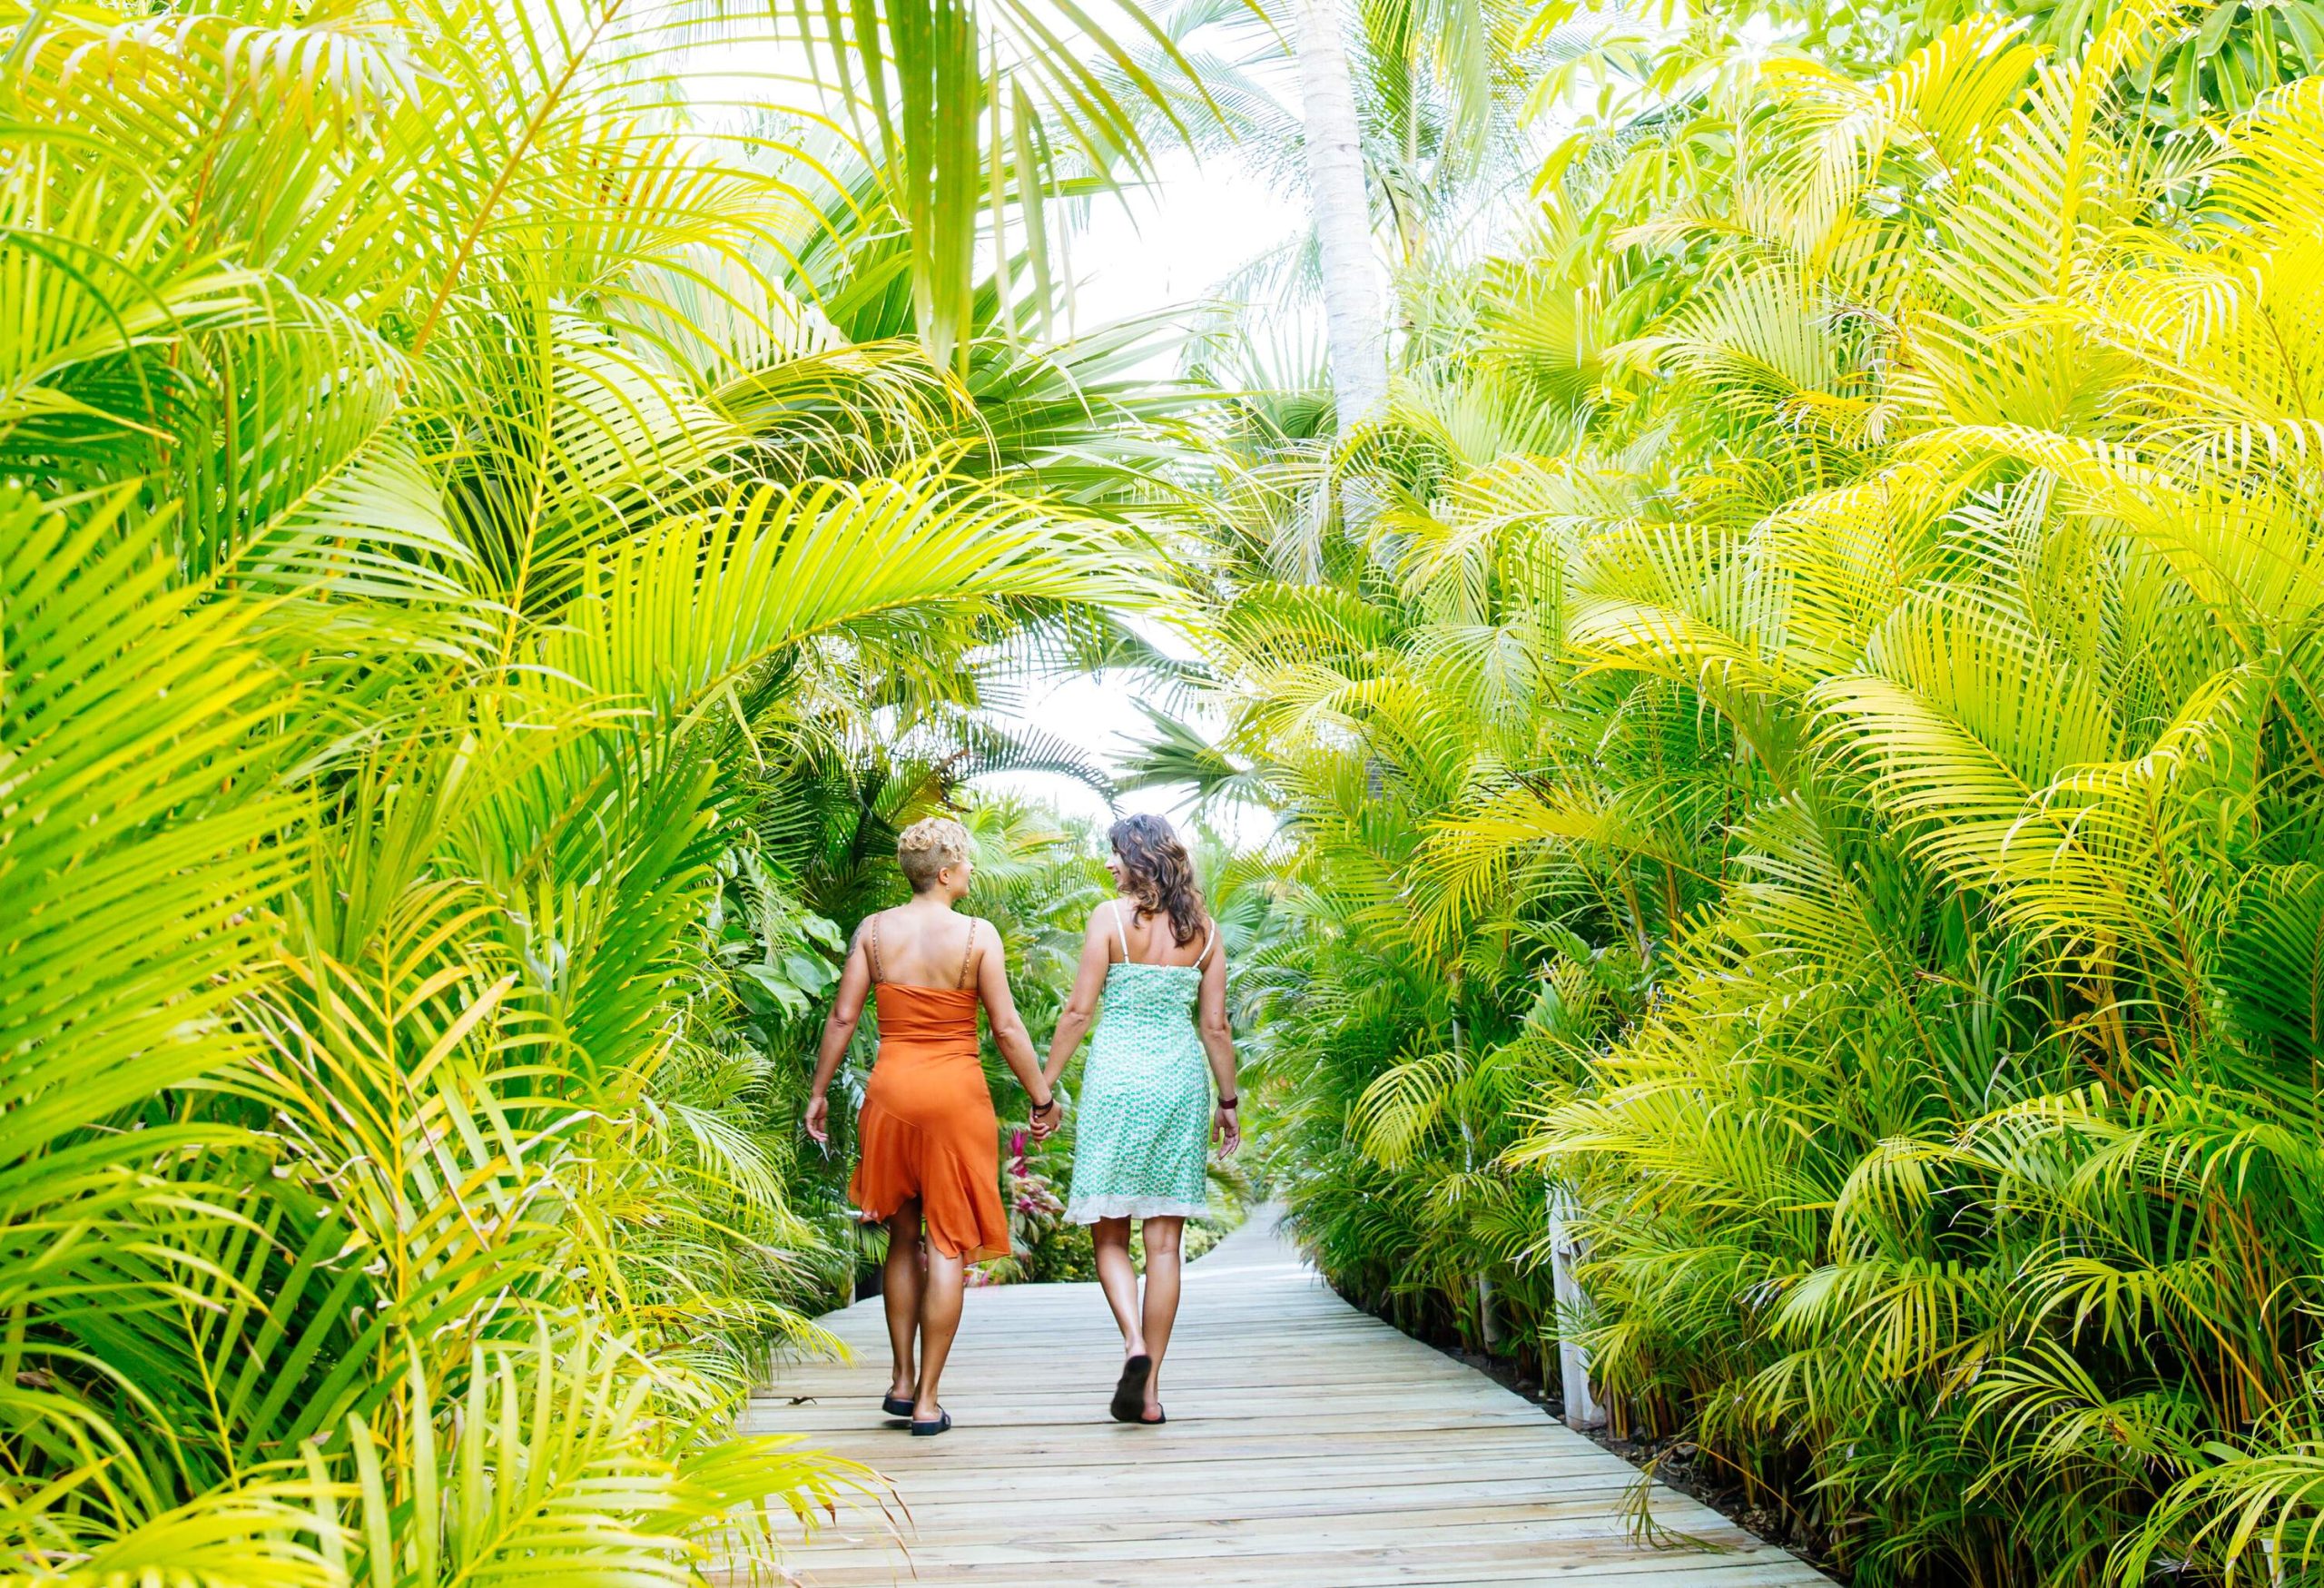 Two women holding hands while walking on a wooden footpath lined with palm trees.